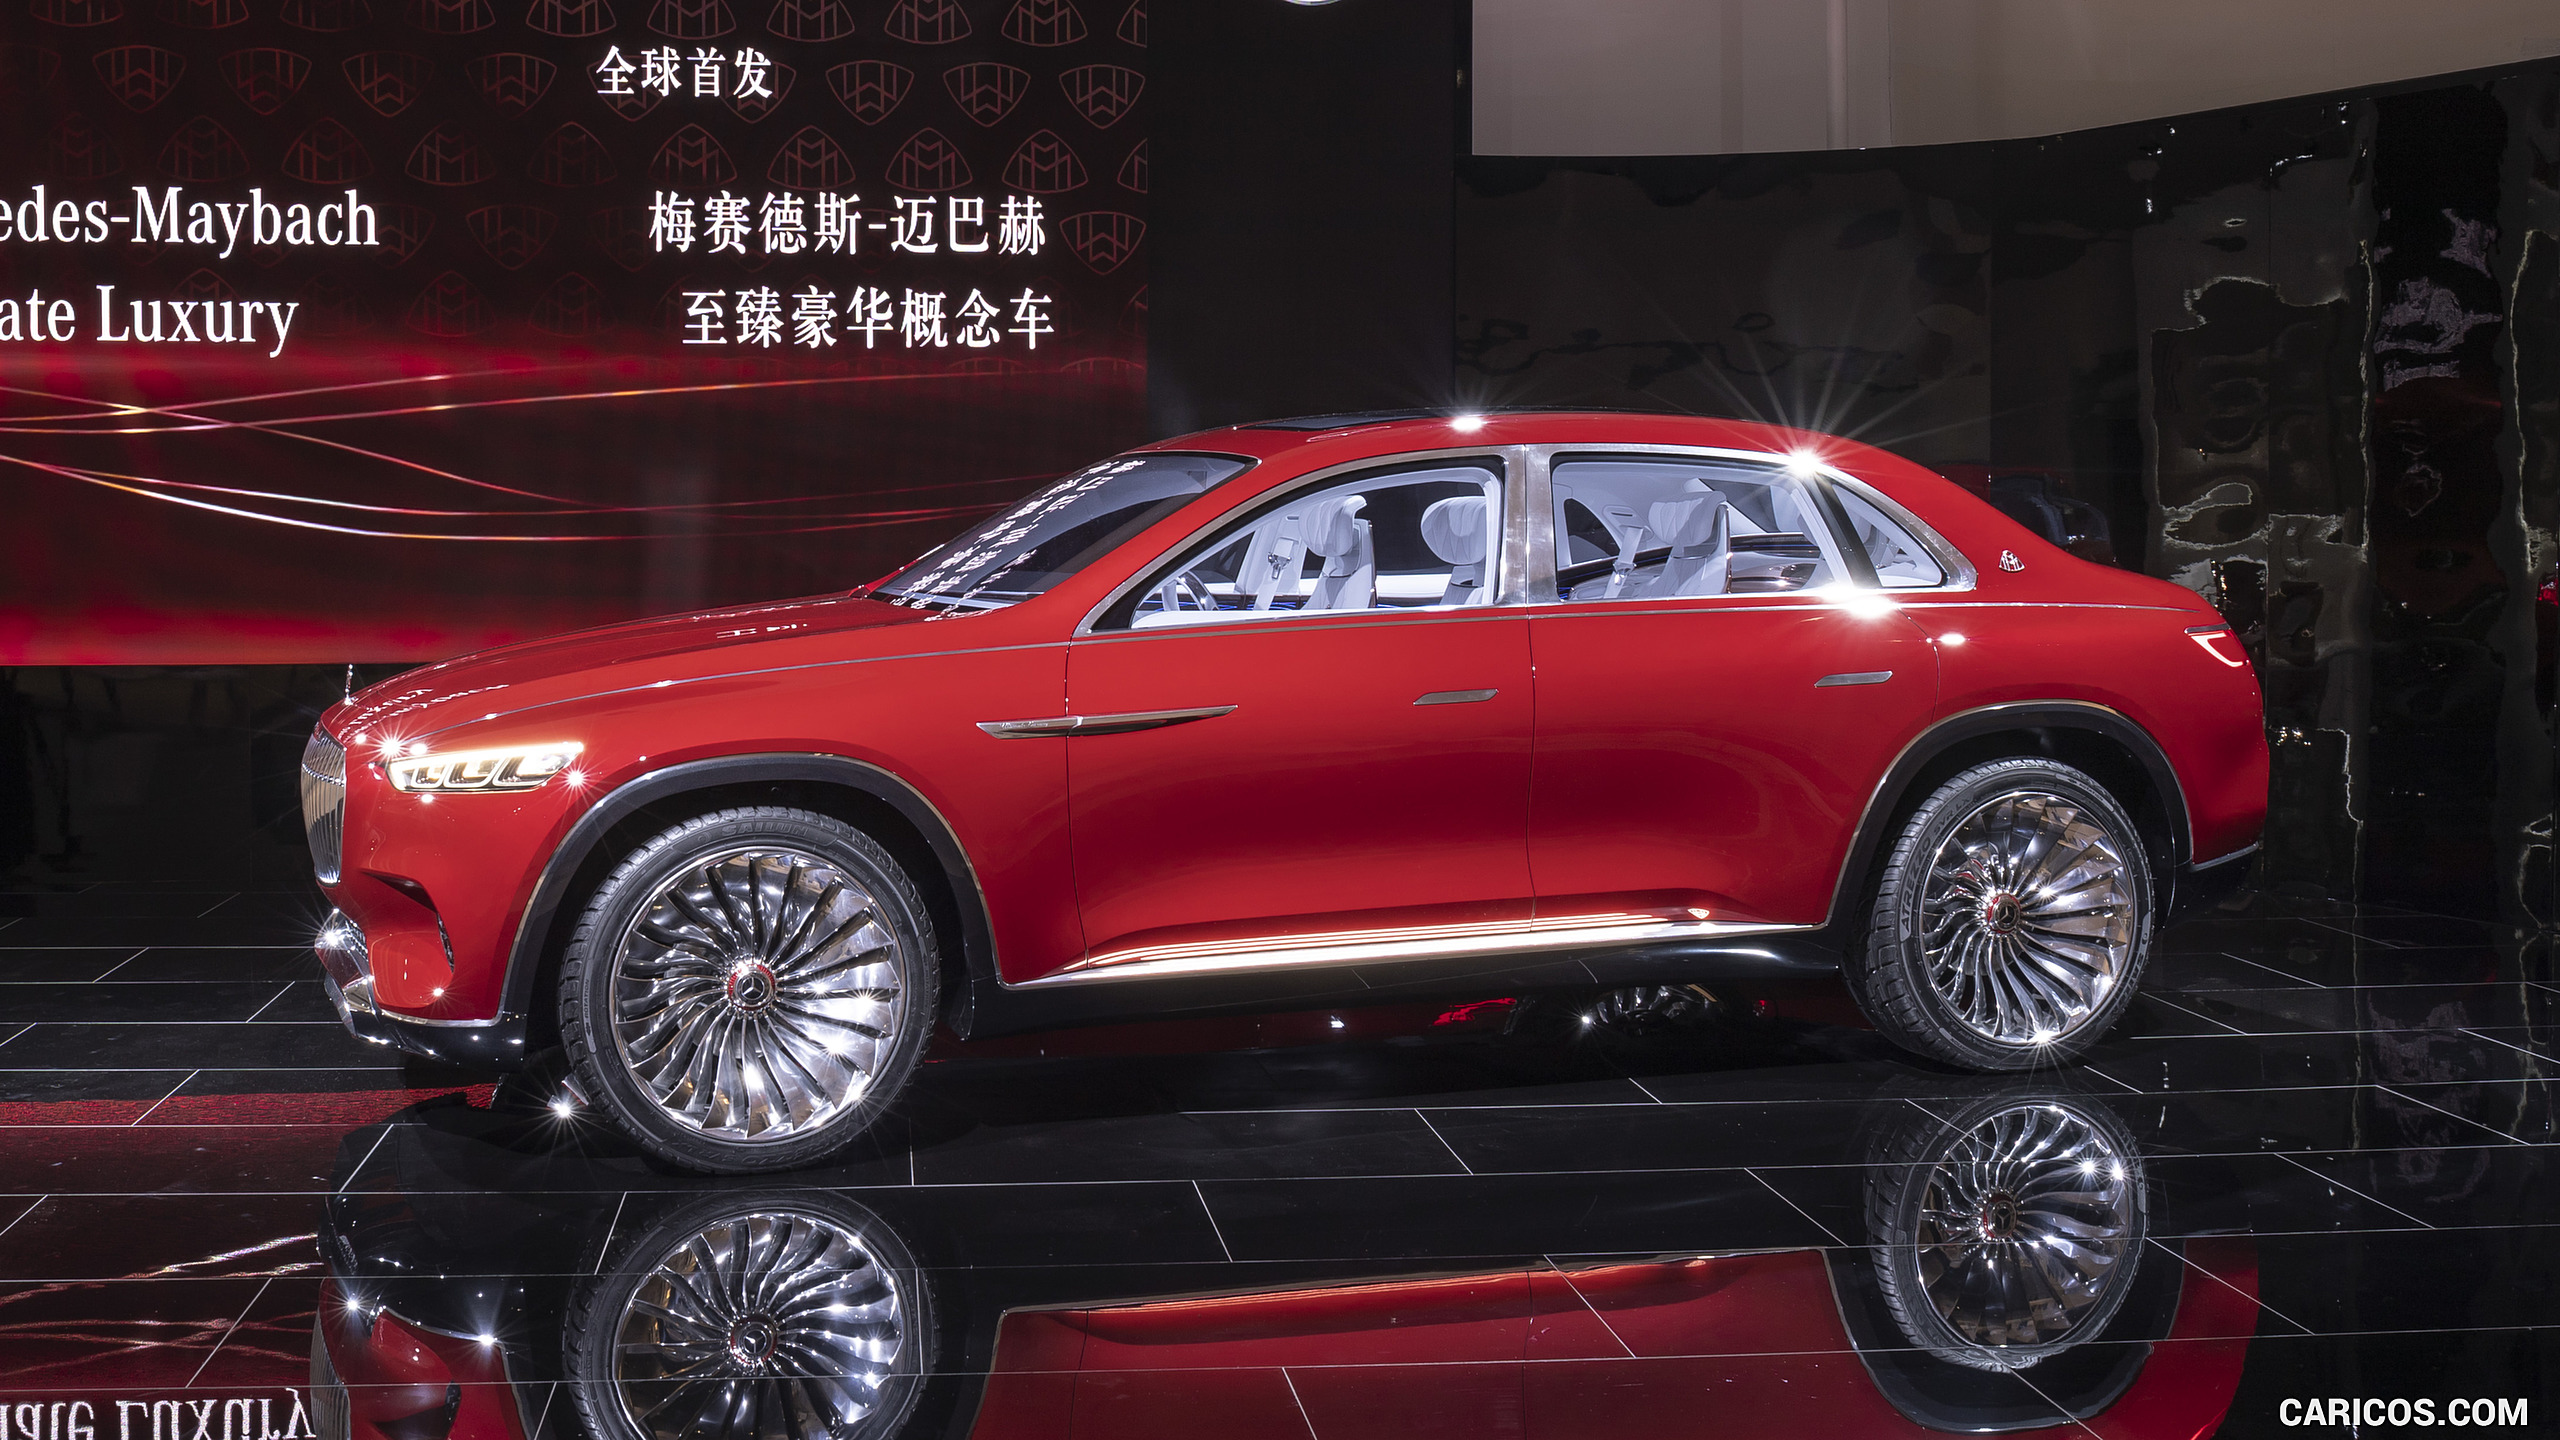 Ultimate luxury. Vision Mercedes-Maybach Ultimate Luxury. Mercedes-Maybach Ultimate Luxury SUV. Maybach SUV Concept. Mercedes Concept 2018.